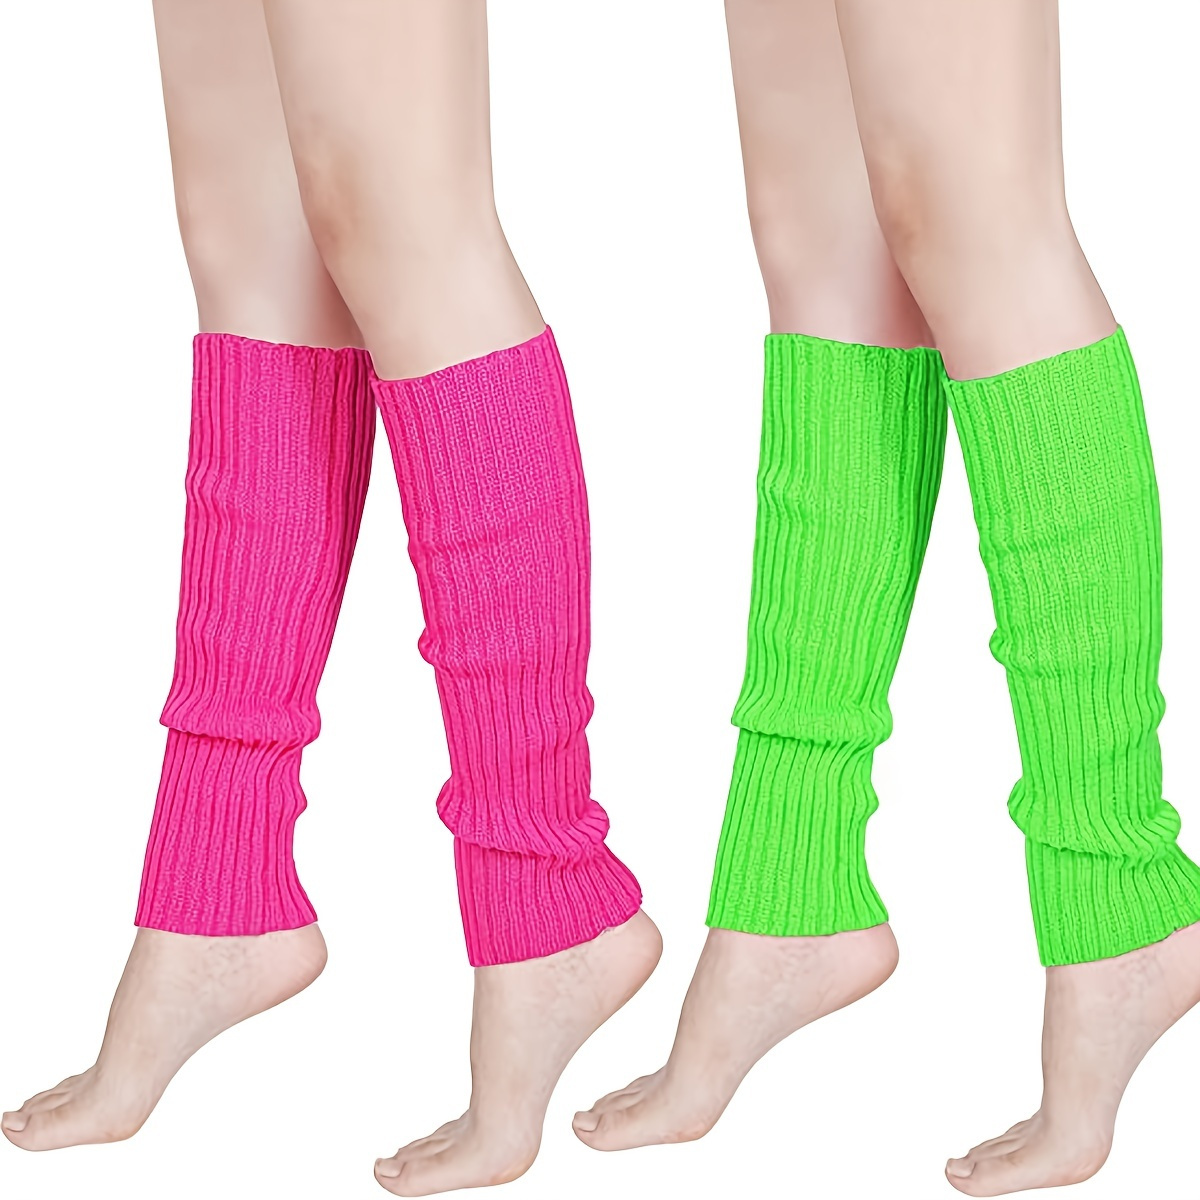 LEG WARMERS Knitted Womens Costume Neon Fluro Dance Party Knit 80s  Legwarmers